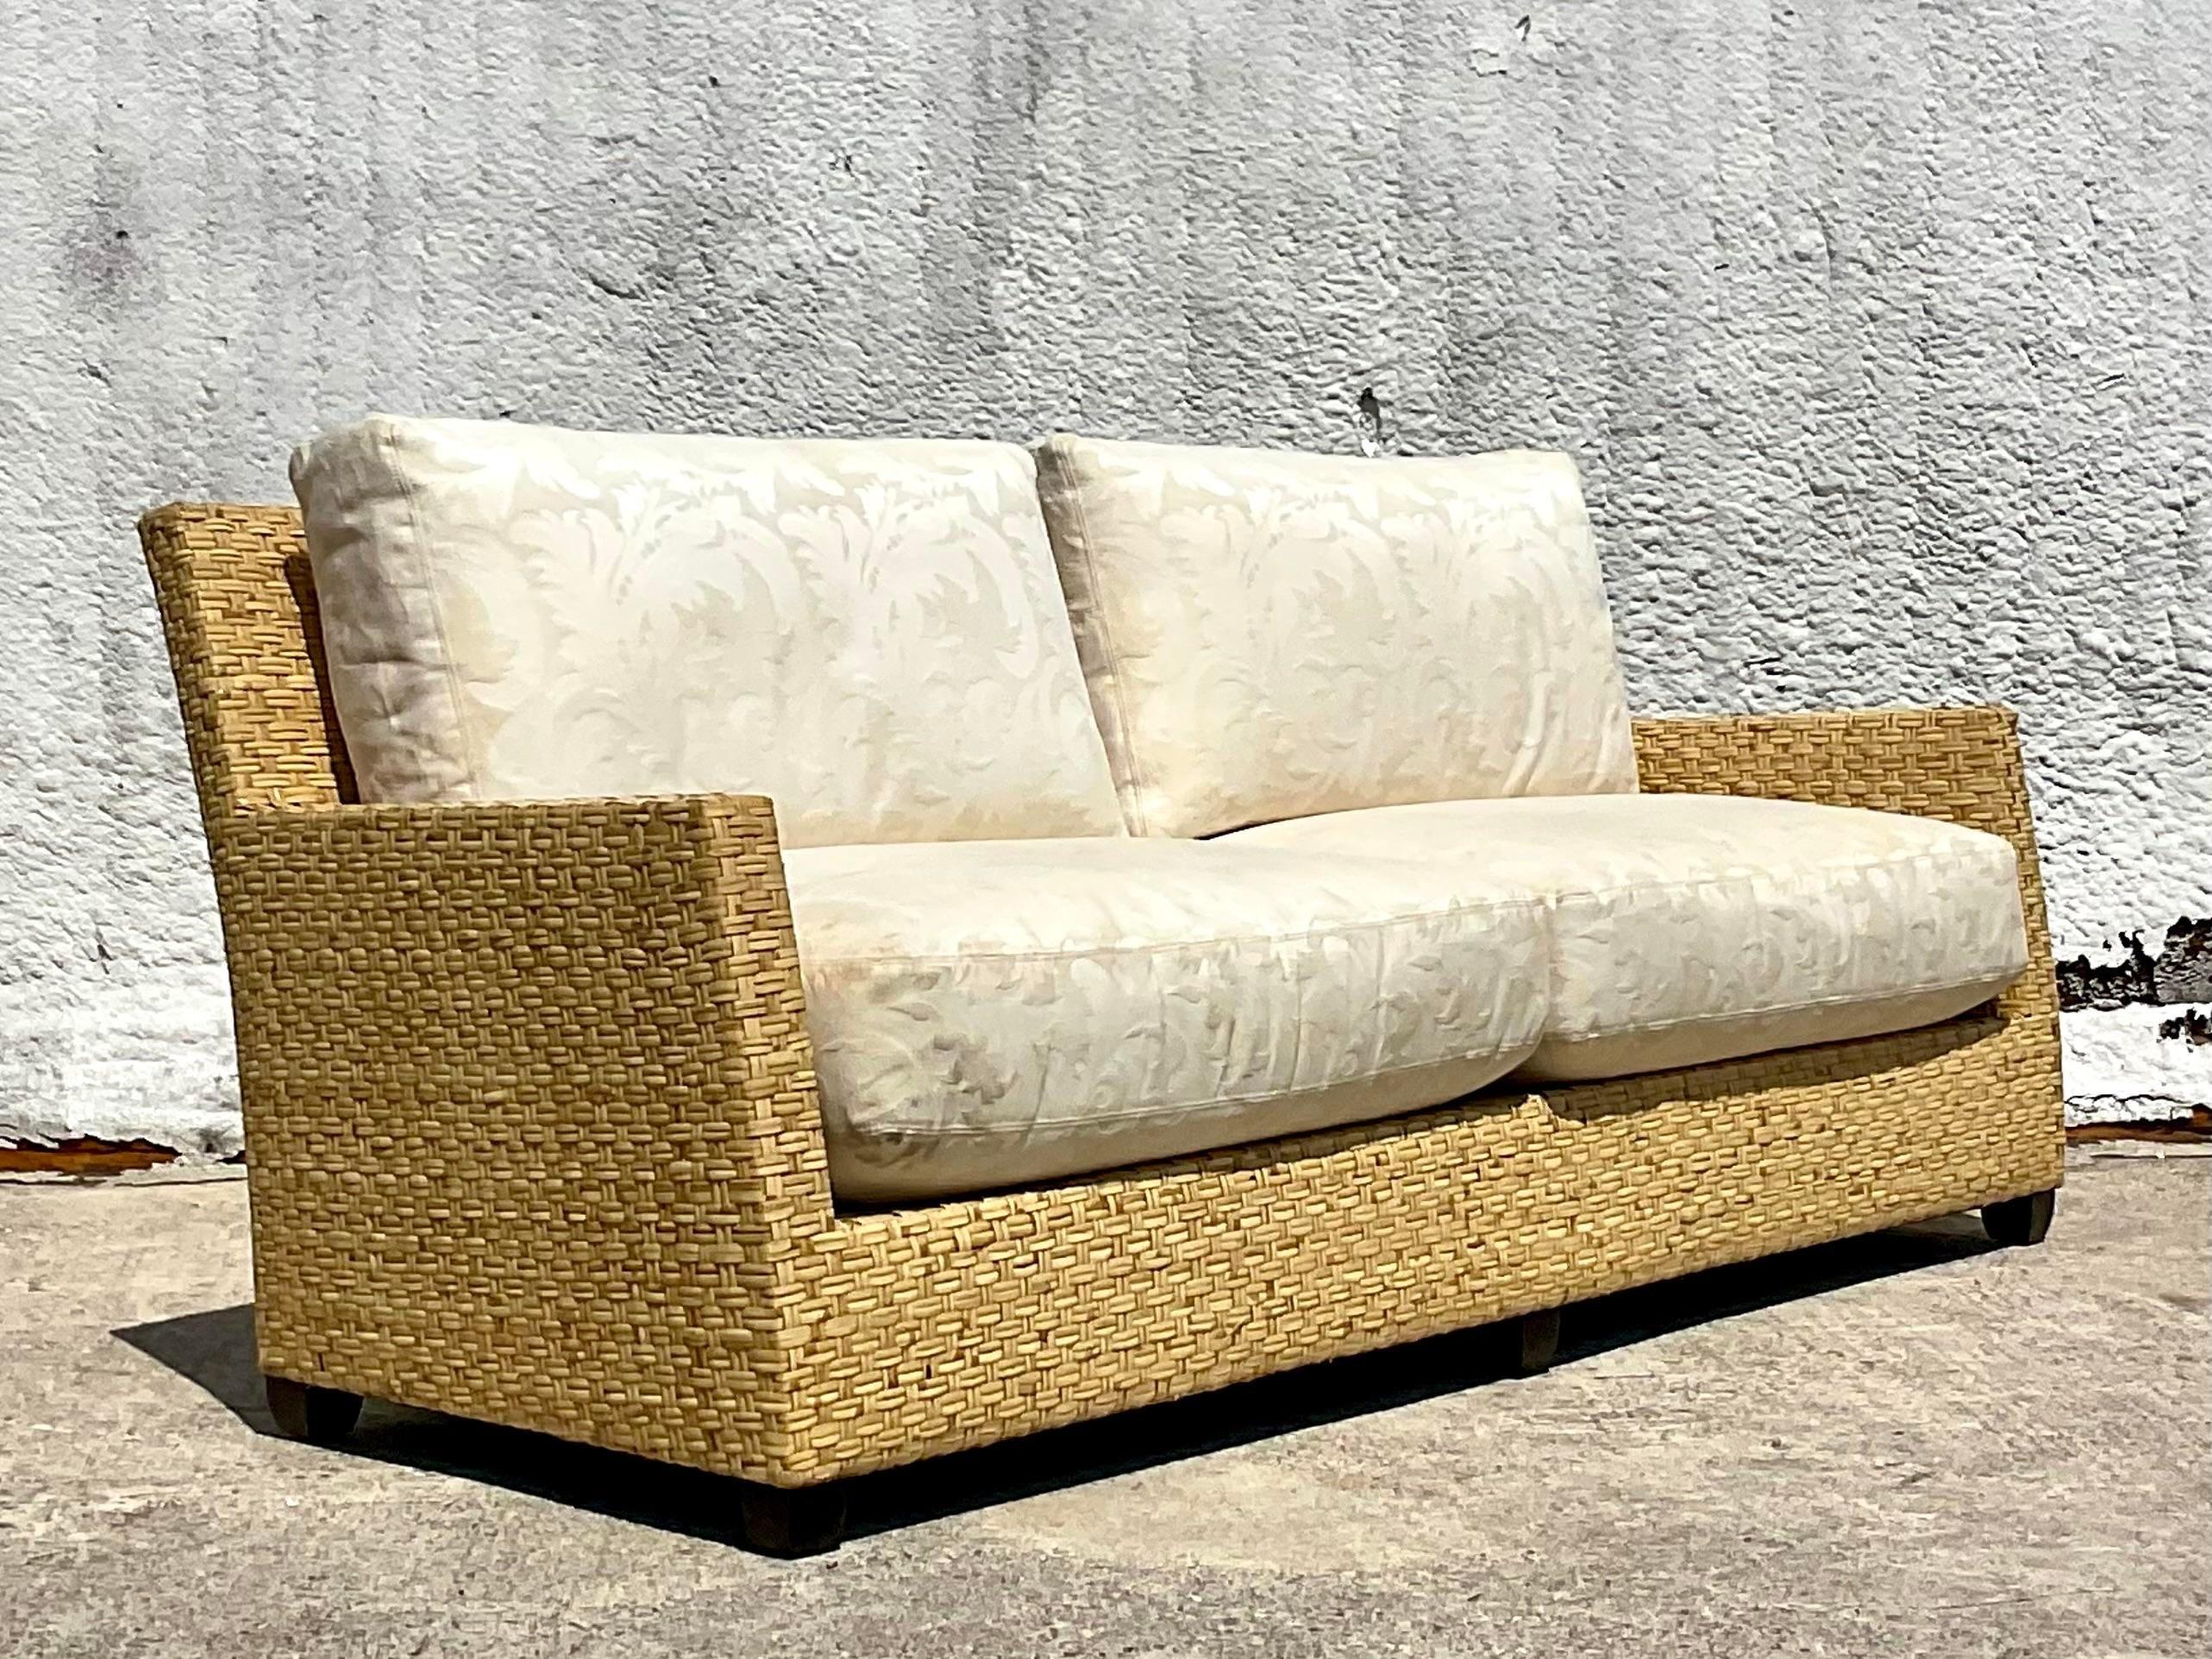 A stunning vintage Coastal sofa. Made by the iconic McGuire group. Chic wide ribbon rattan in a limited edition design. Acquired from a Palm Beach estate.